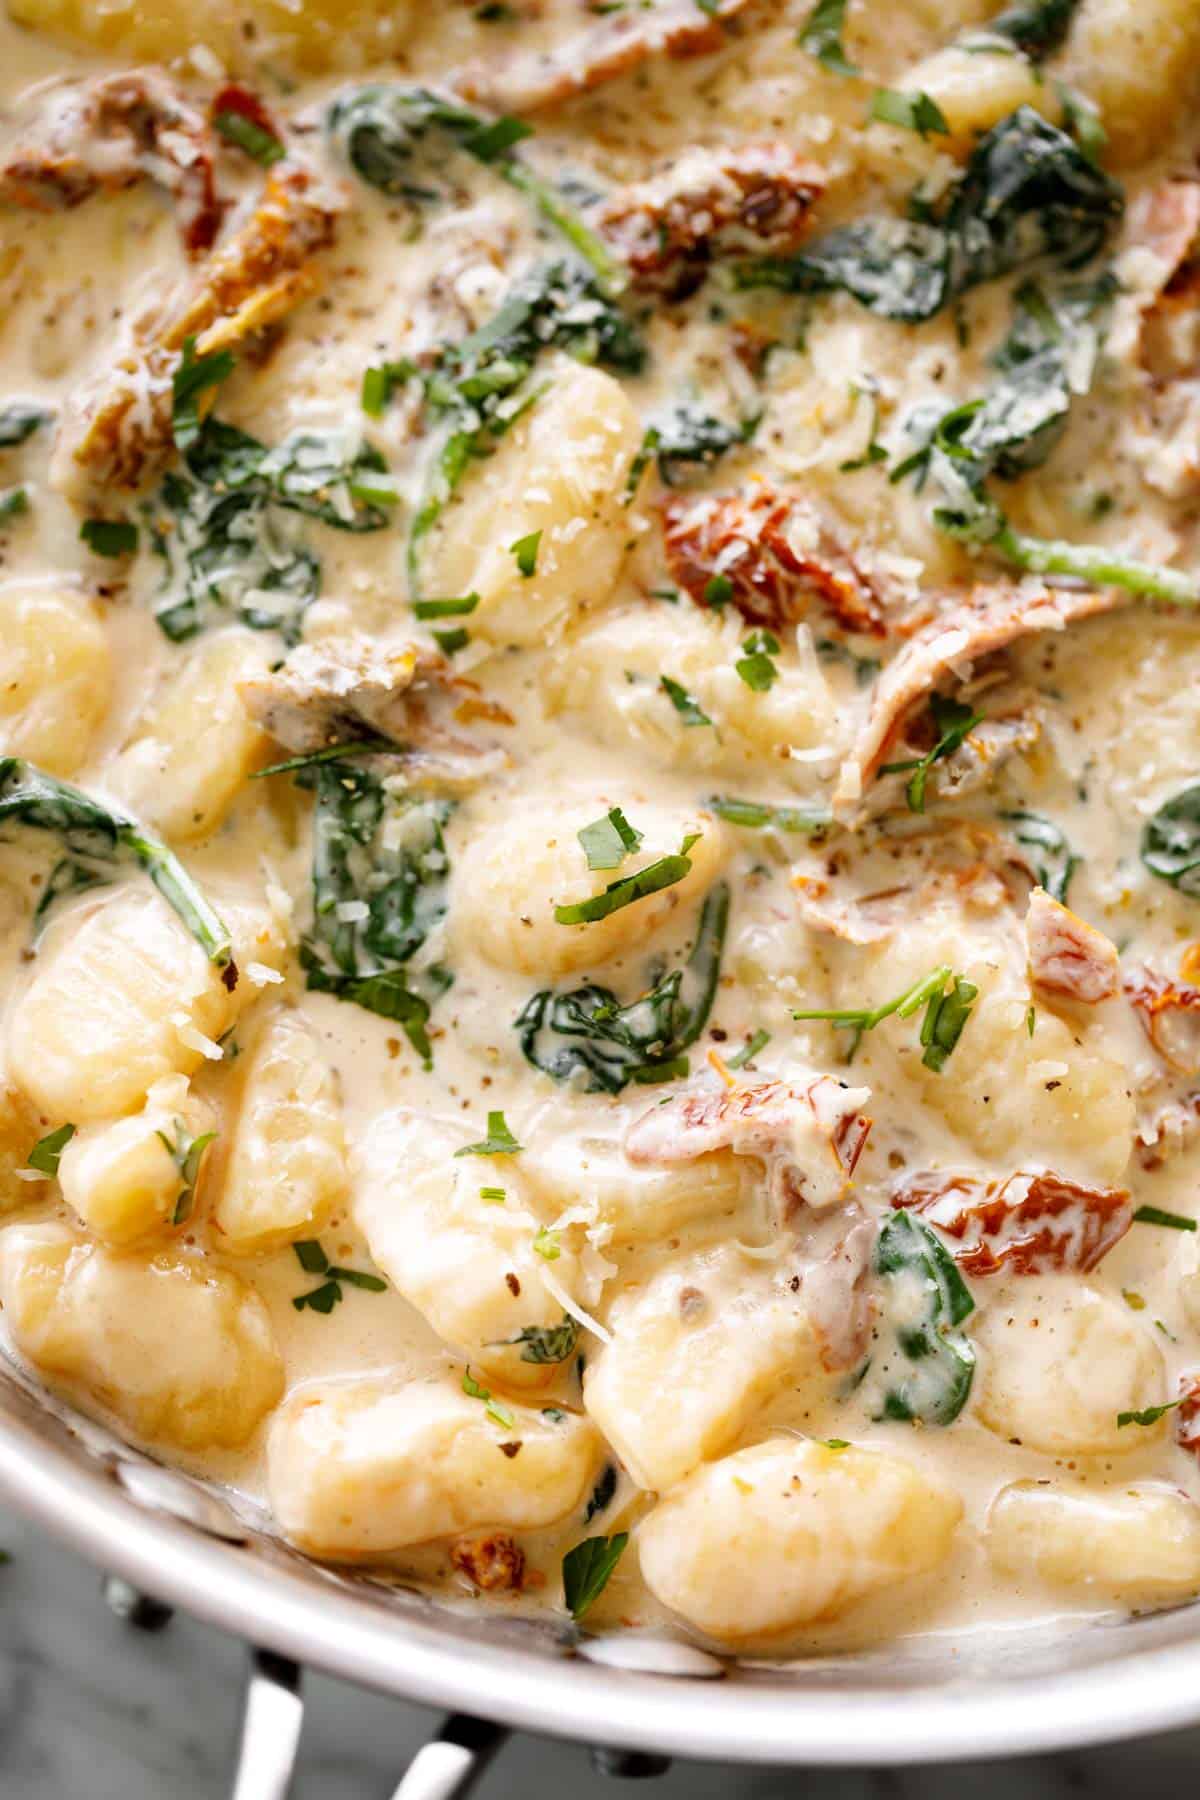 Gnocchi in a skillet with a creamy sun dried tomato sauce | cafedelites.com